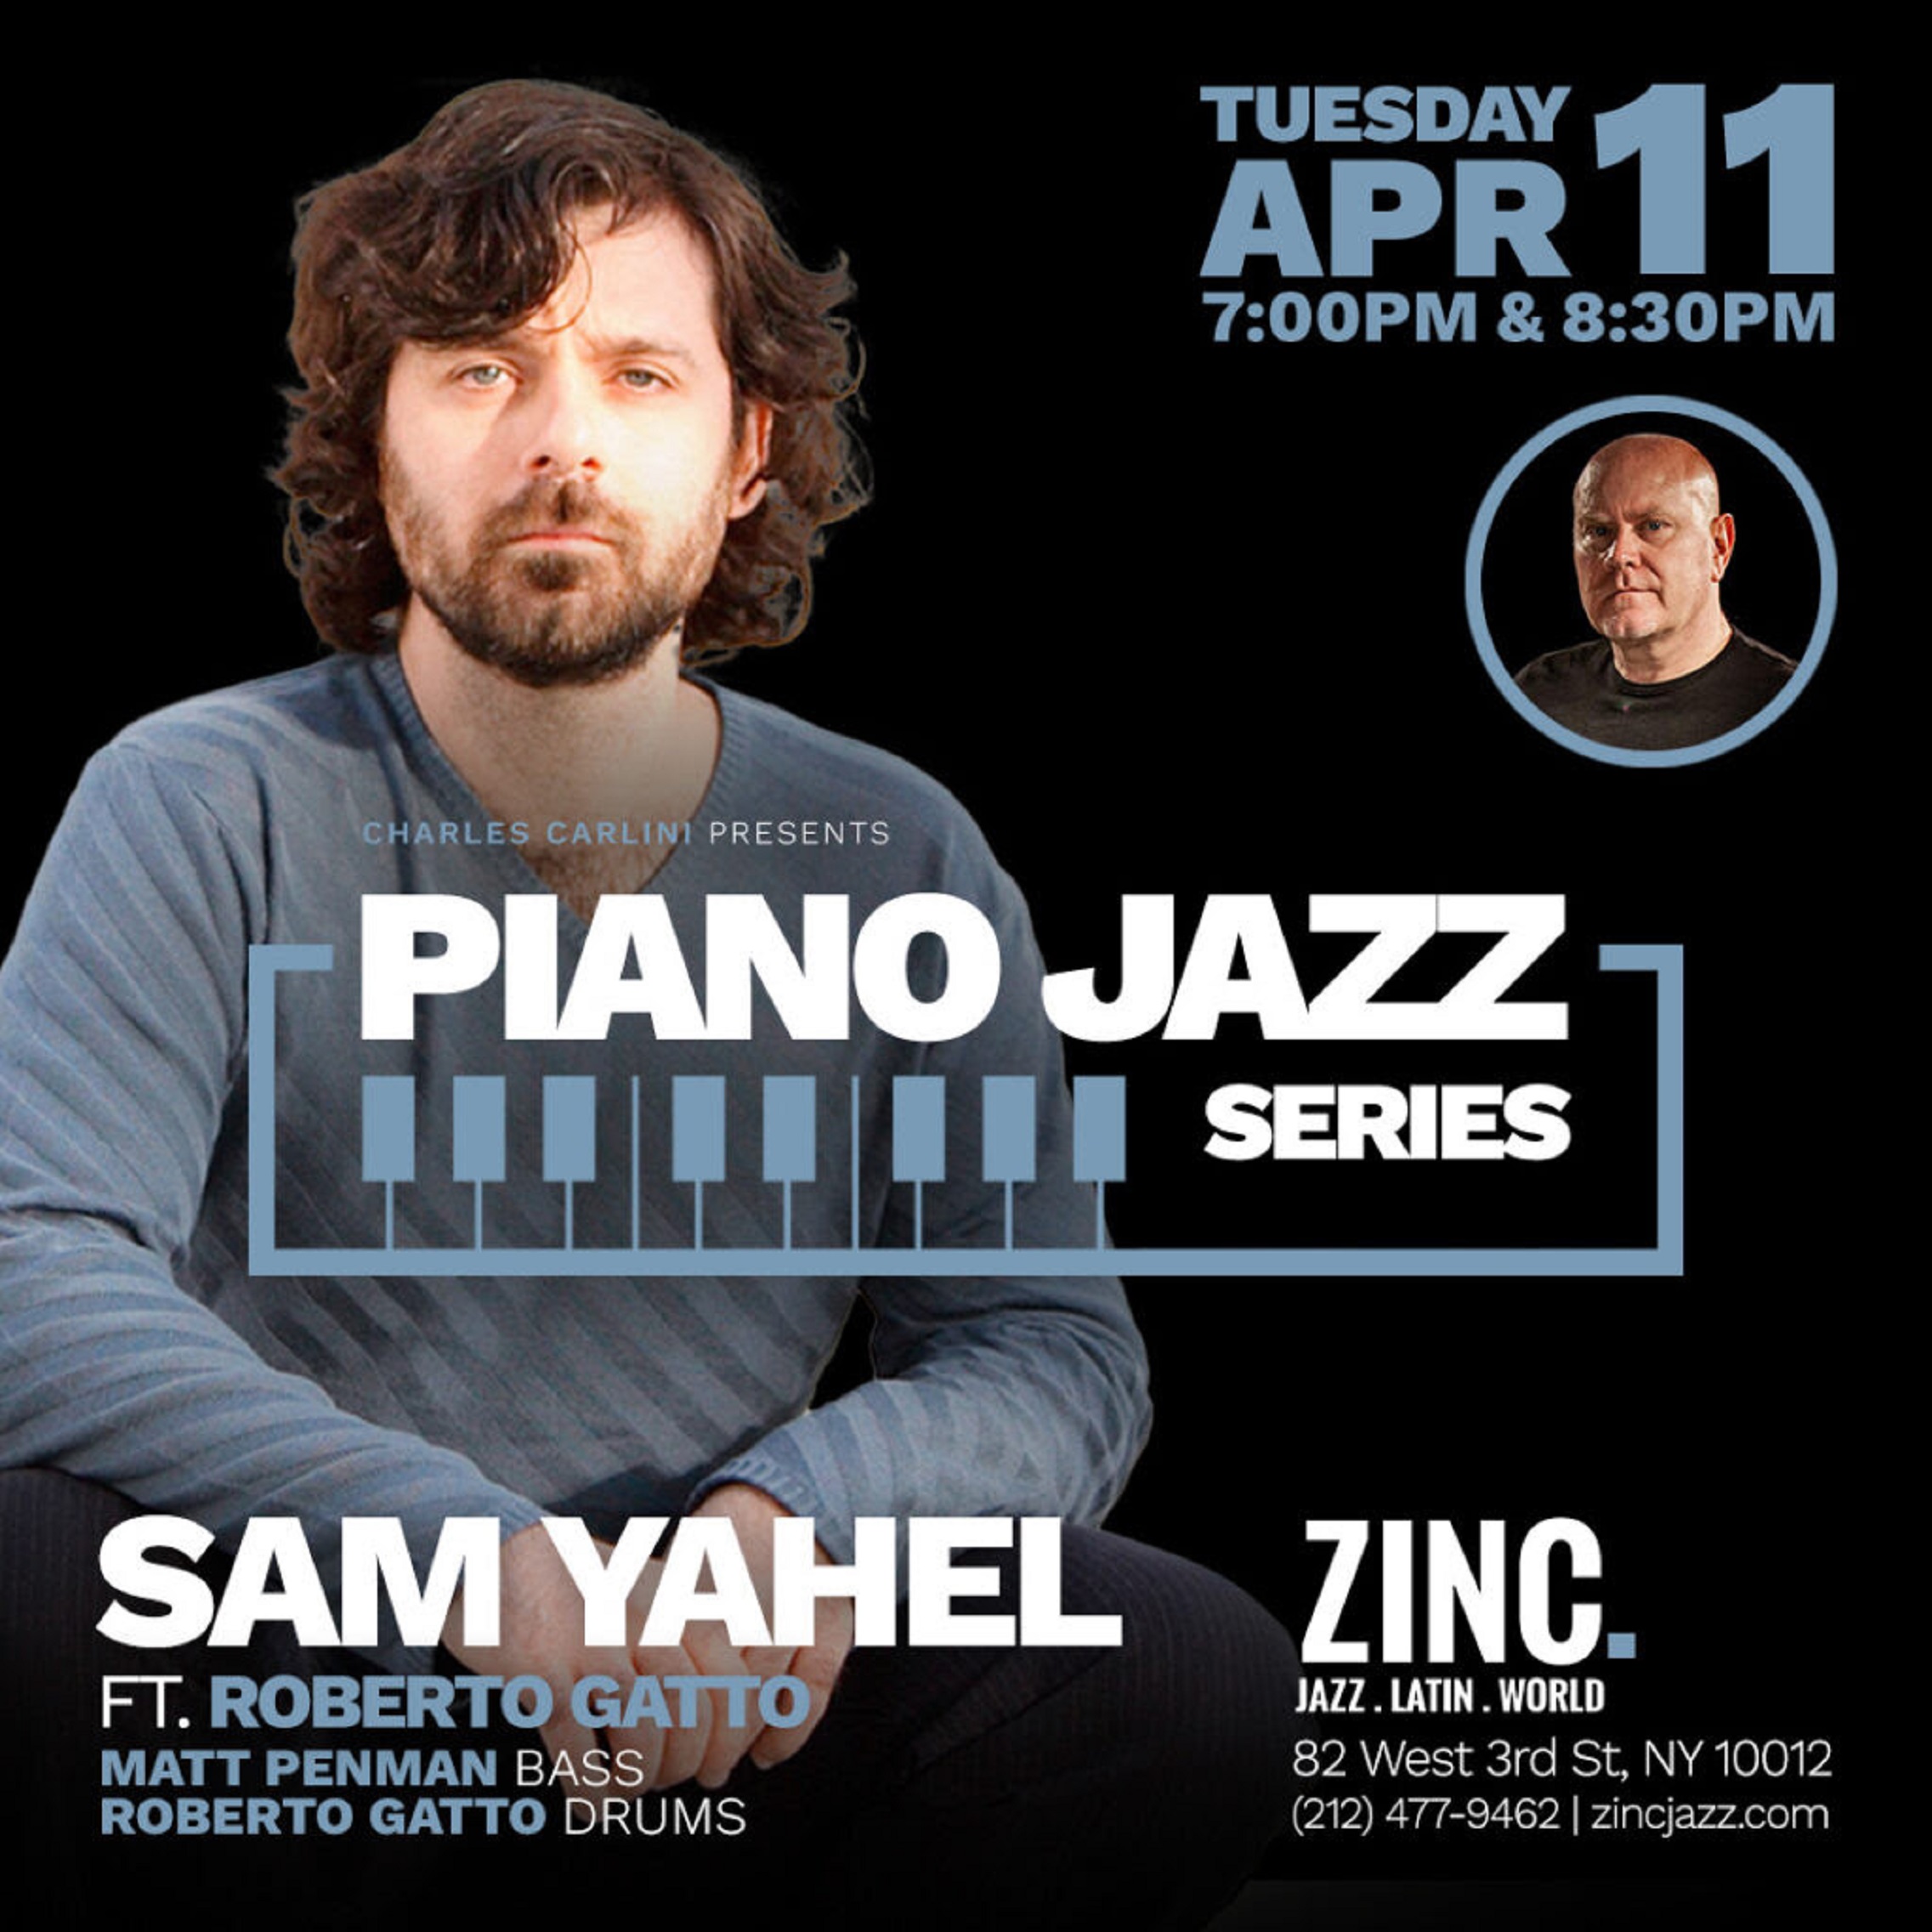 Acclaimed jazz pianist Sam Yahel brings his trio to the Zinc